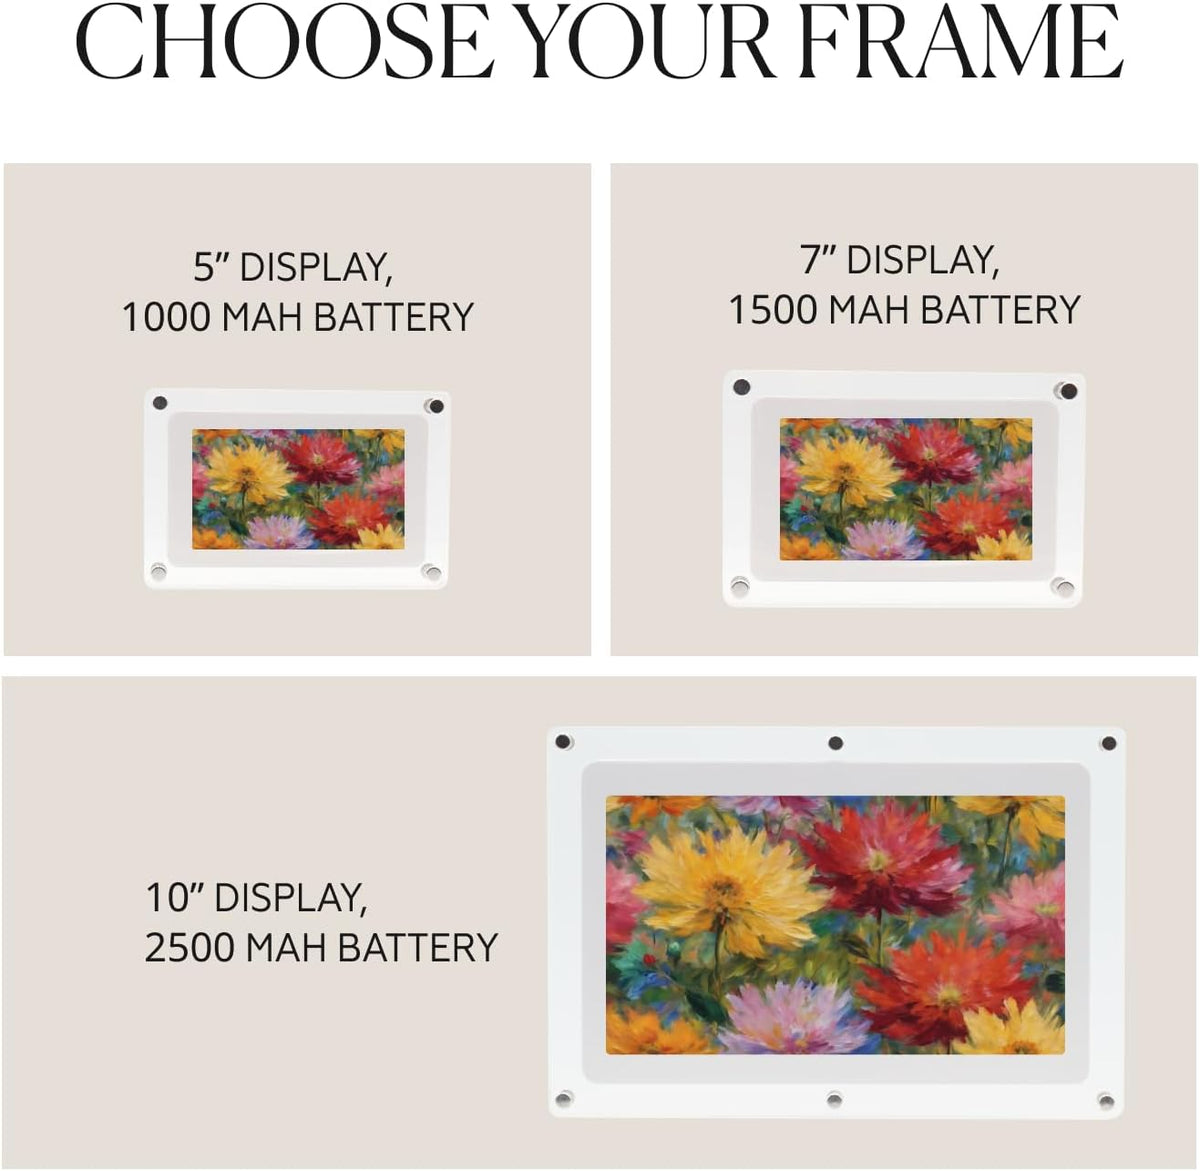 What to choose: 5 inch or 7-inch frame?